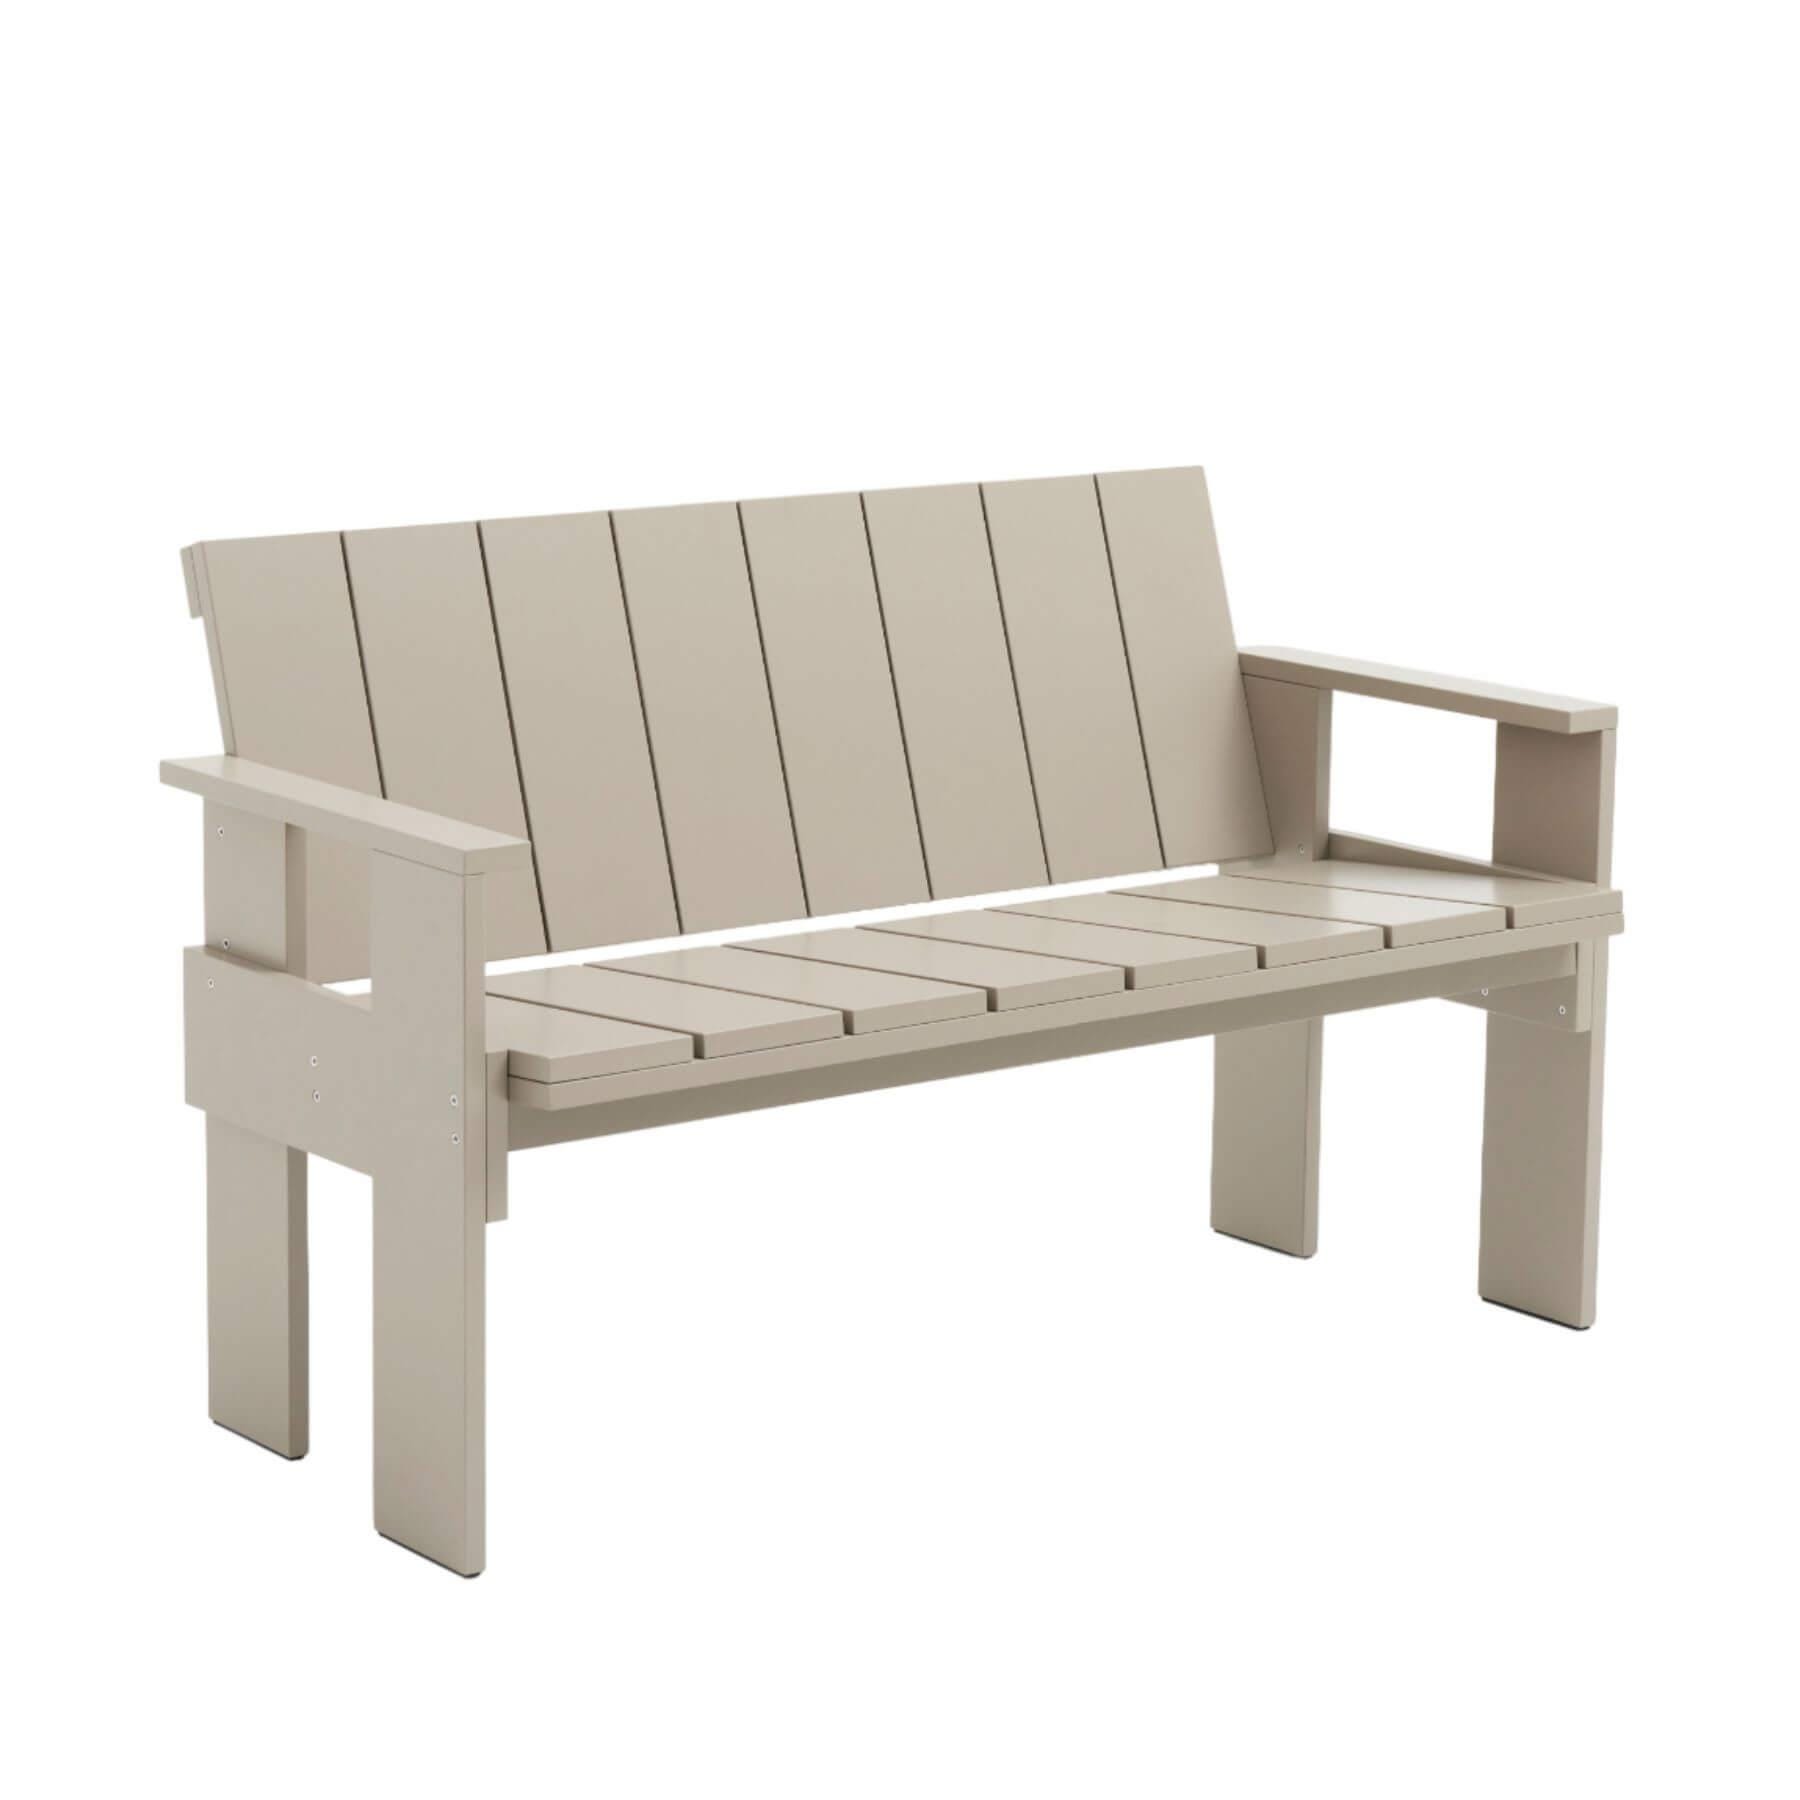 Hay Crate Dining Bench London Fog Designer Furniture From Holloways Of Ludlow